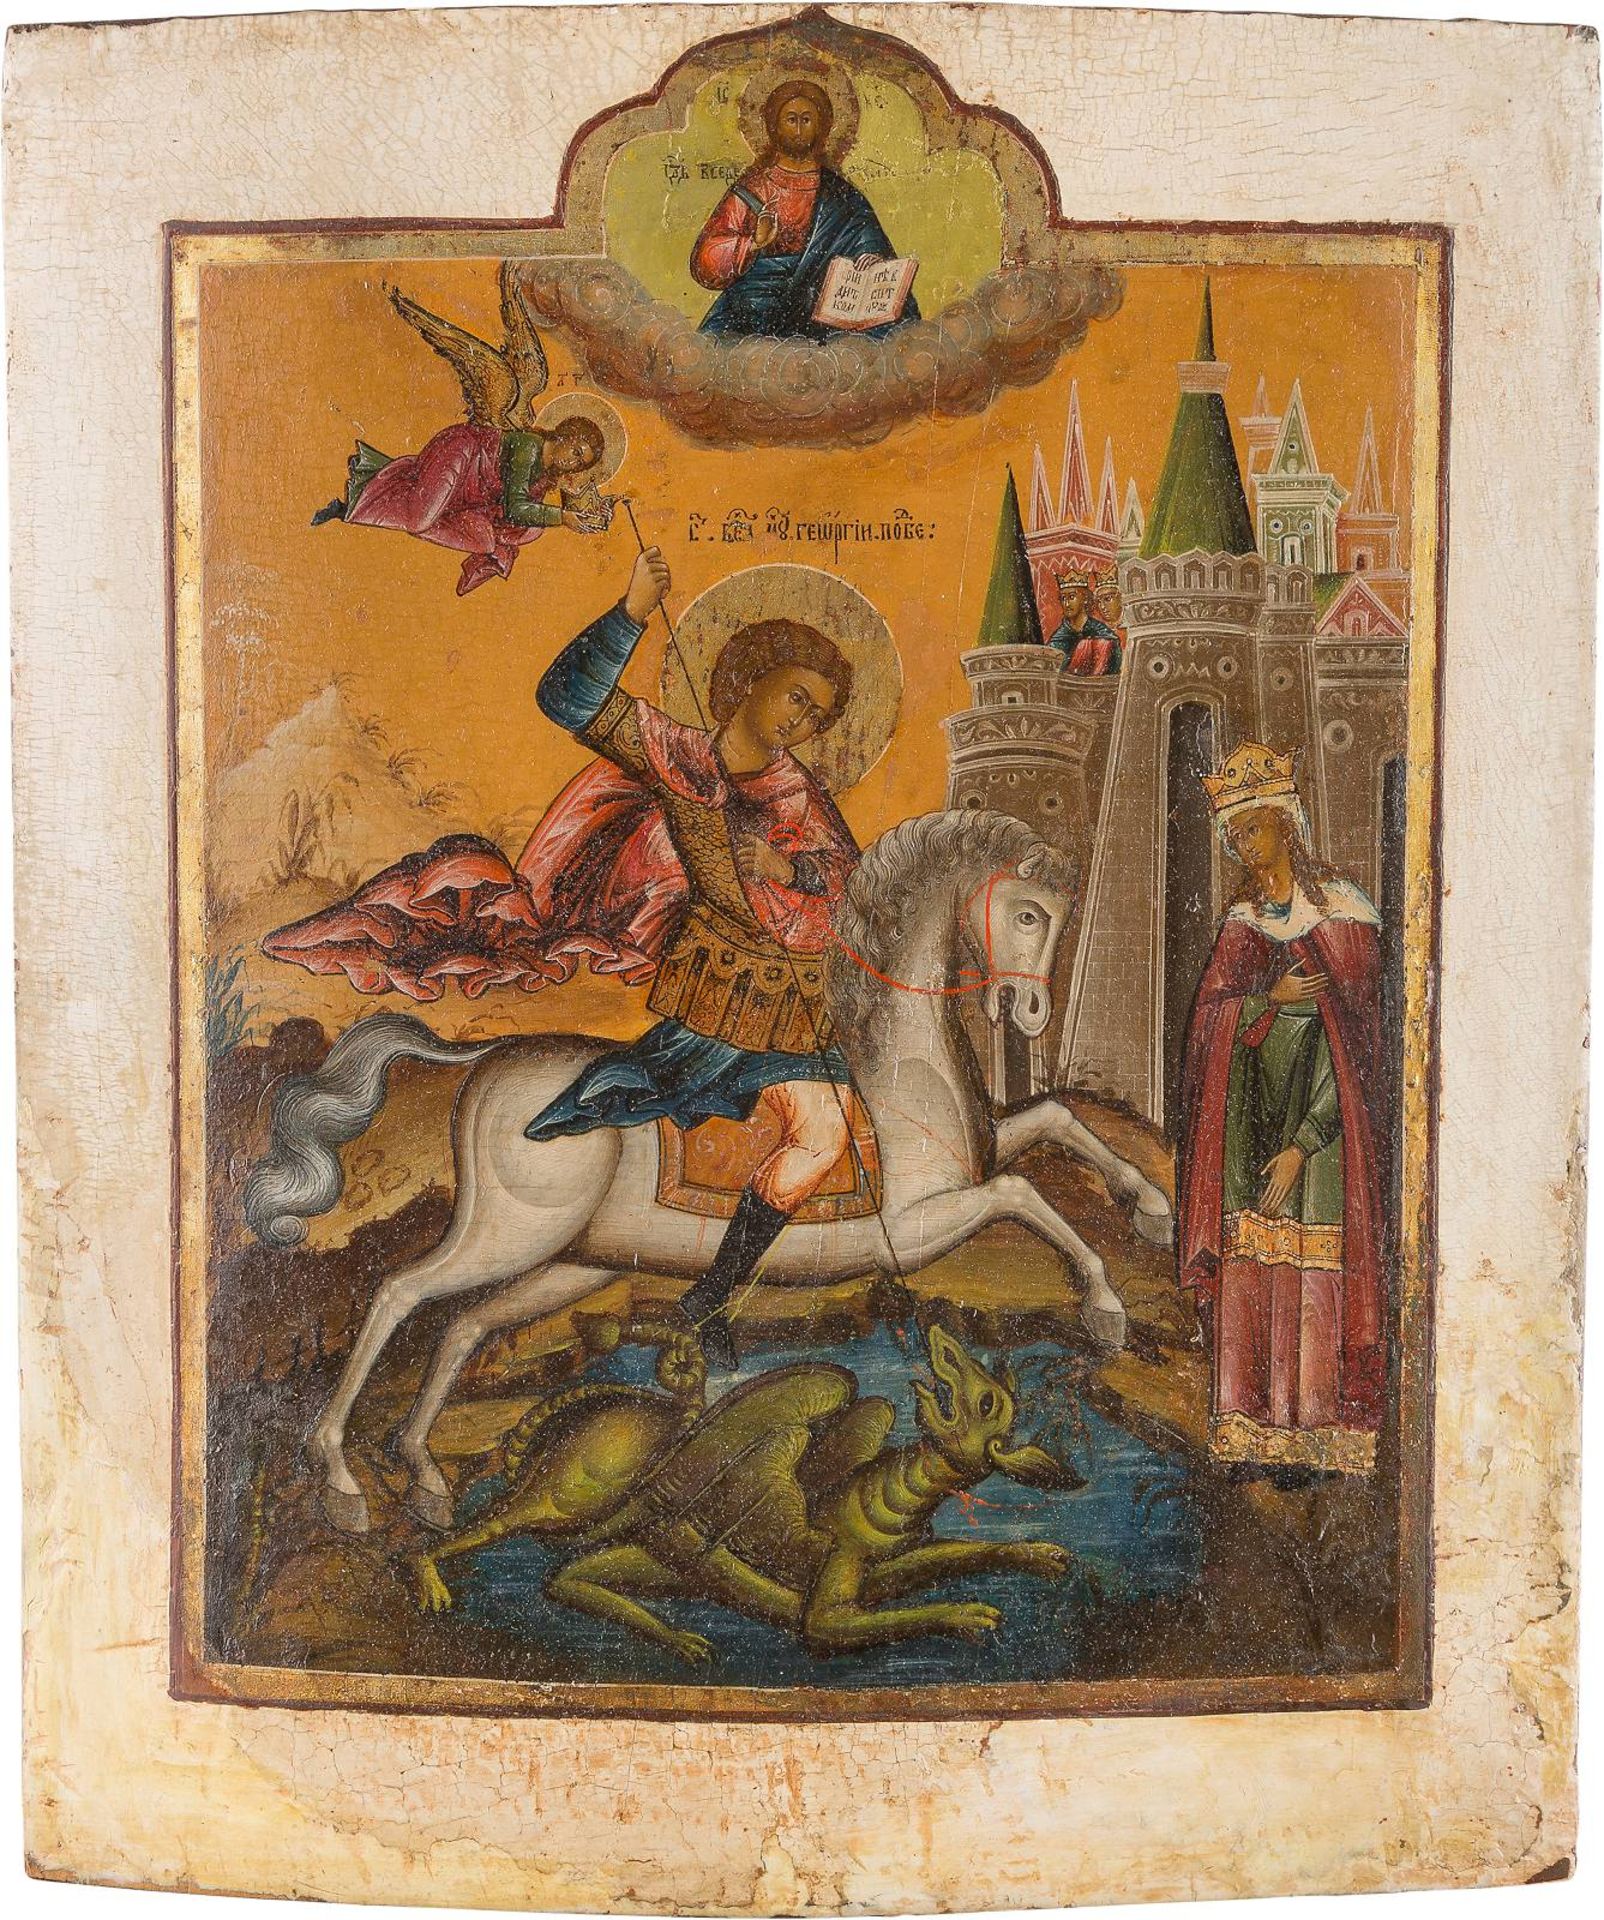 AN ICON OF SAINT GEORGE SLAYING THE DRAGONRussian, 19th century Tempera on wood panel. The upper